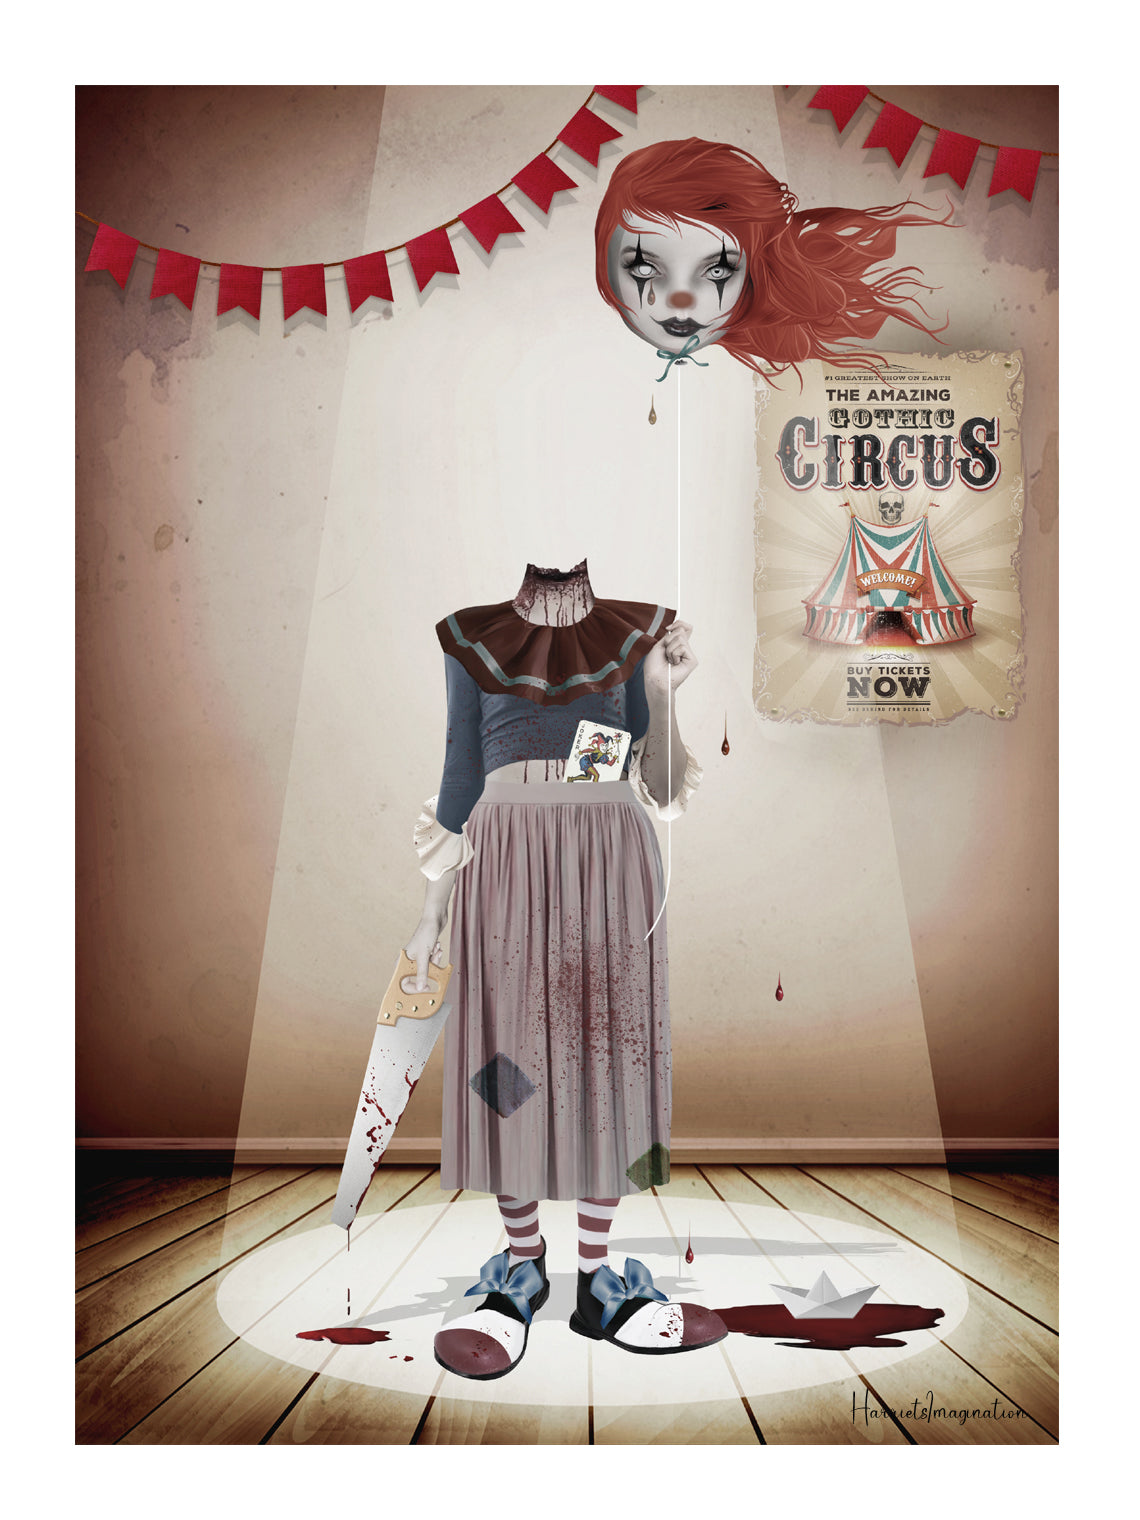 Macabre clown art print is a unique and unsettling addition to any collection. Featuring a headless clown holding a string with its head instead of a balloon.